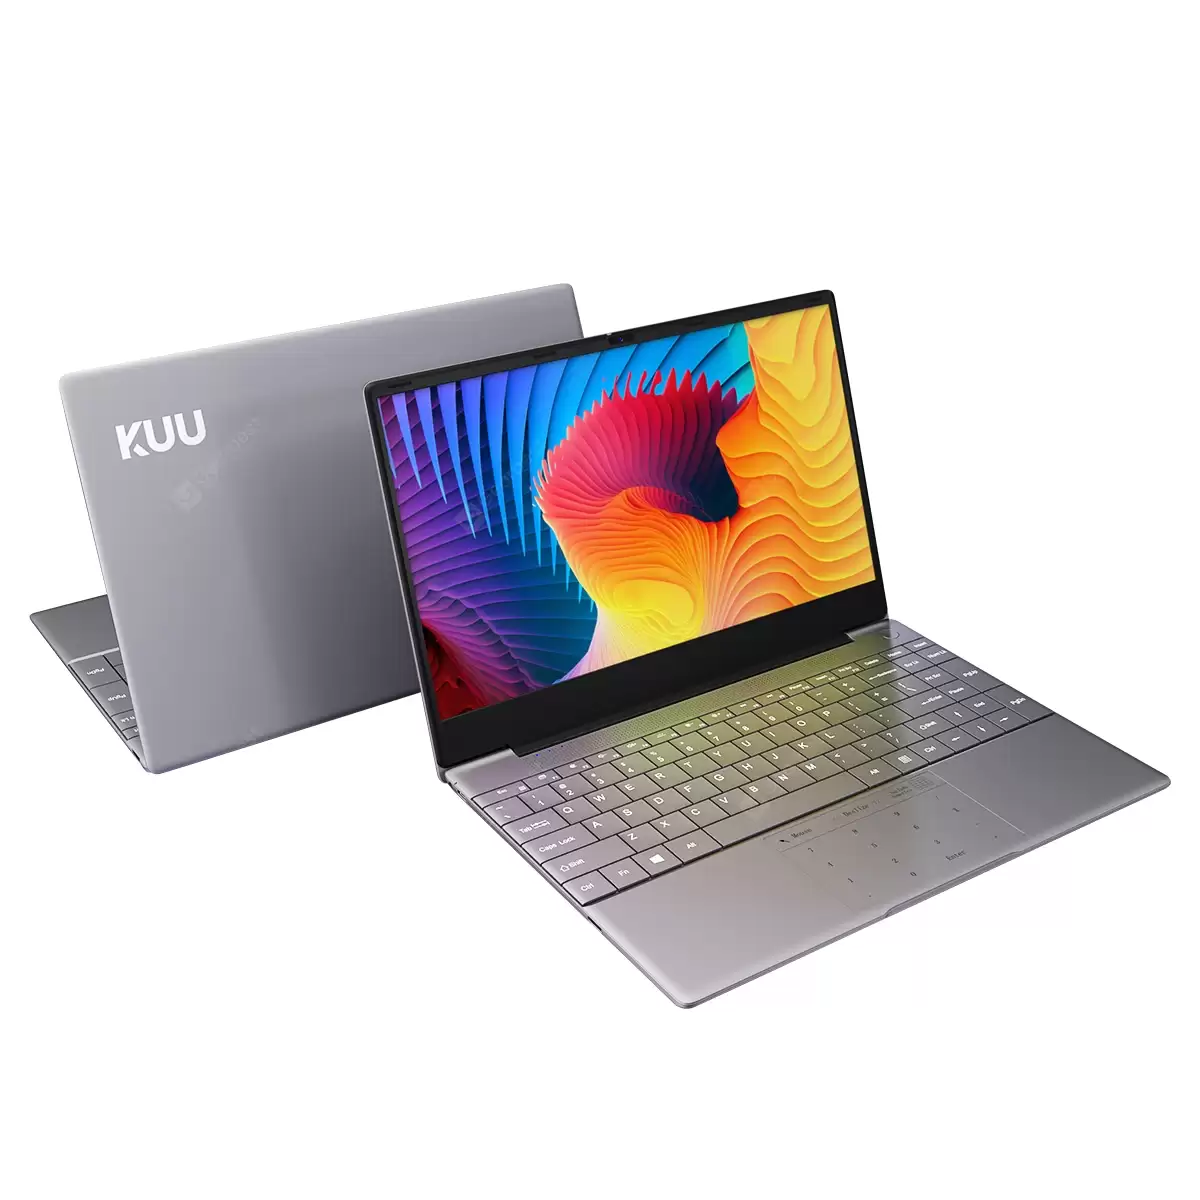 Order In Just $435.68 Kuu K2s Intel Celeron J4115 Processor 14.1-inch Ips Screen All Metal Shell Office Notebook 8gb Ram Windows 10 256gb/512gb Ssd - Gray 512g Spain At Gearbest With This Coupon